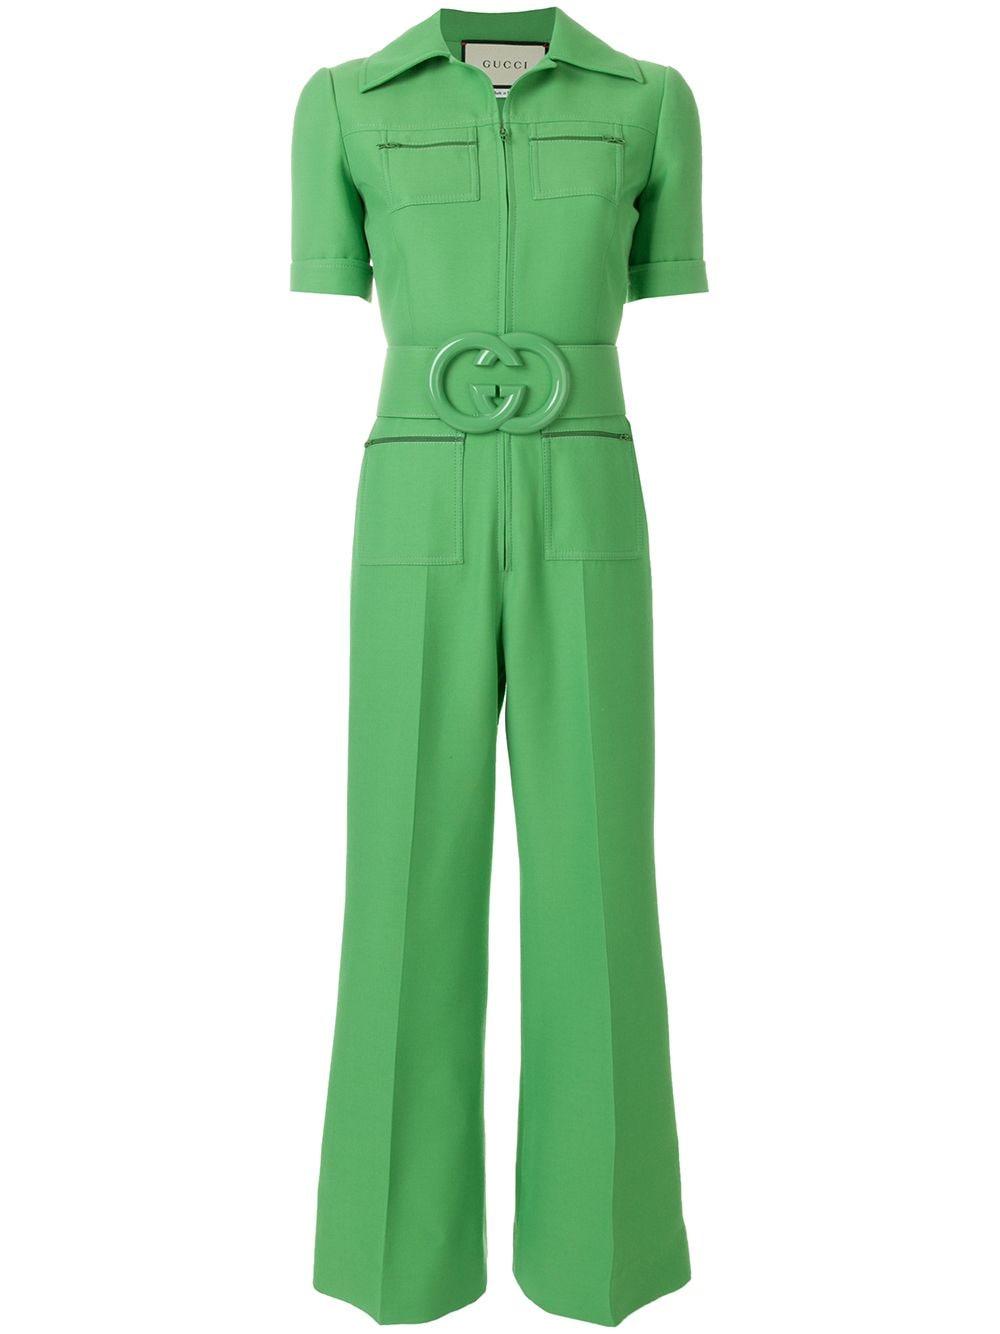 I Didnt Know I Needed a Green Gucci Jumpsuit Until I Saw Rowan Blanchard  in One  Fashionista